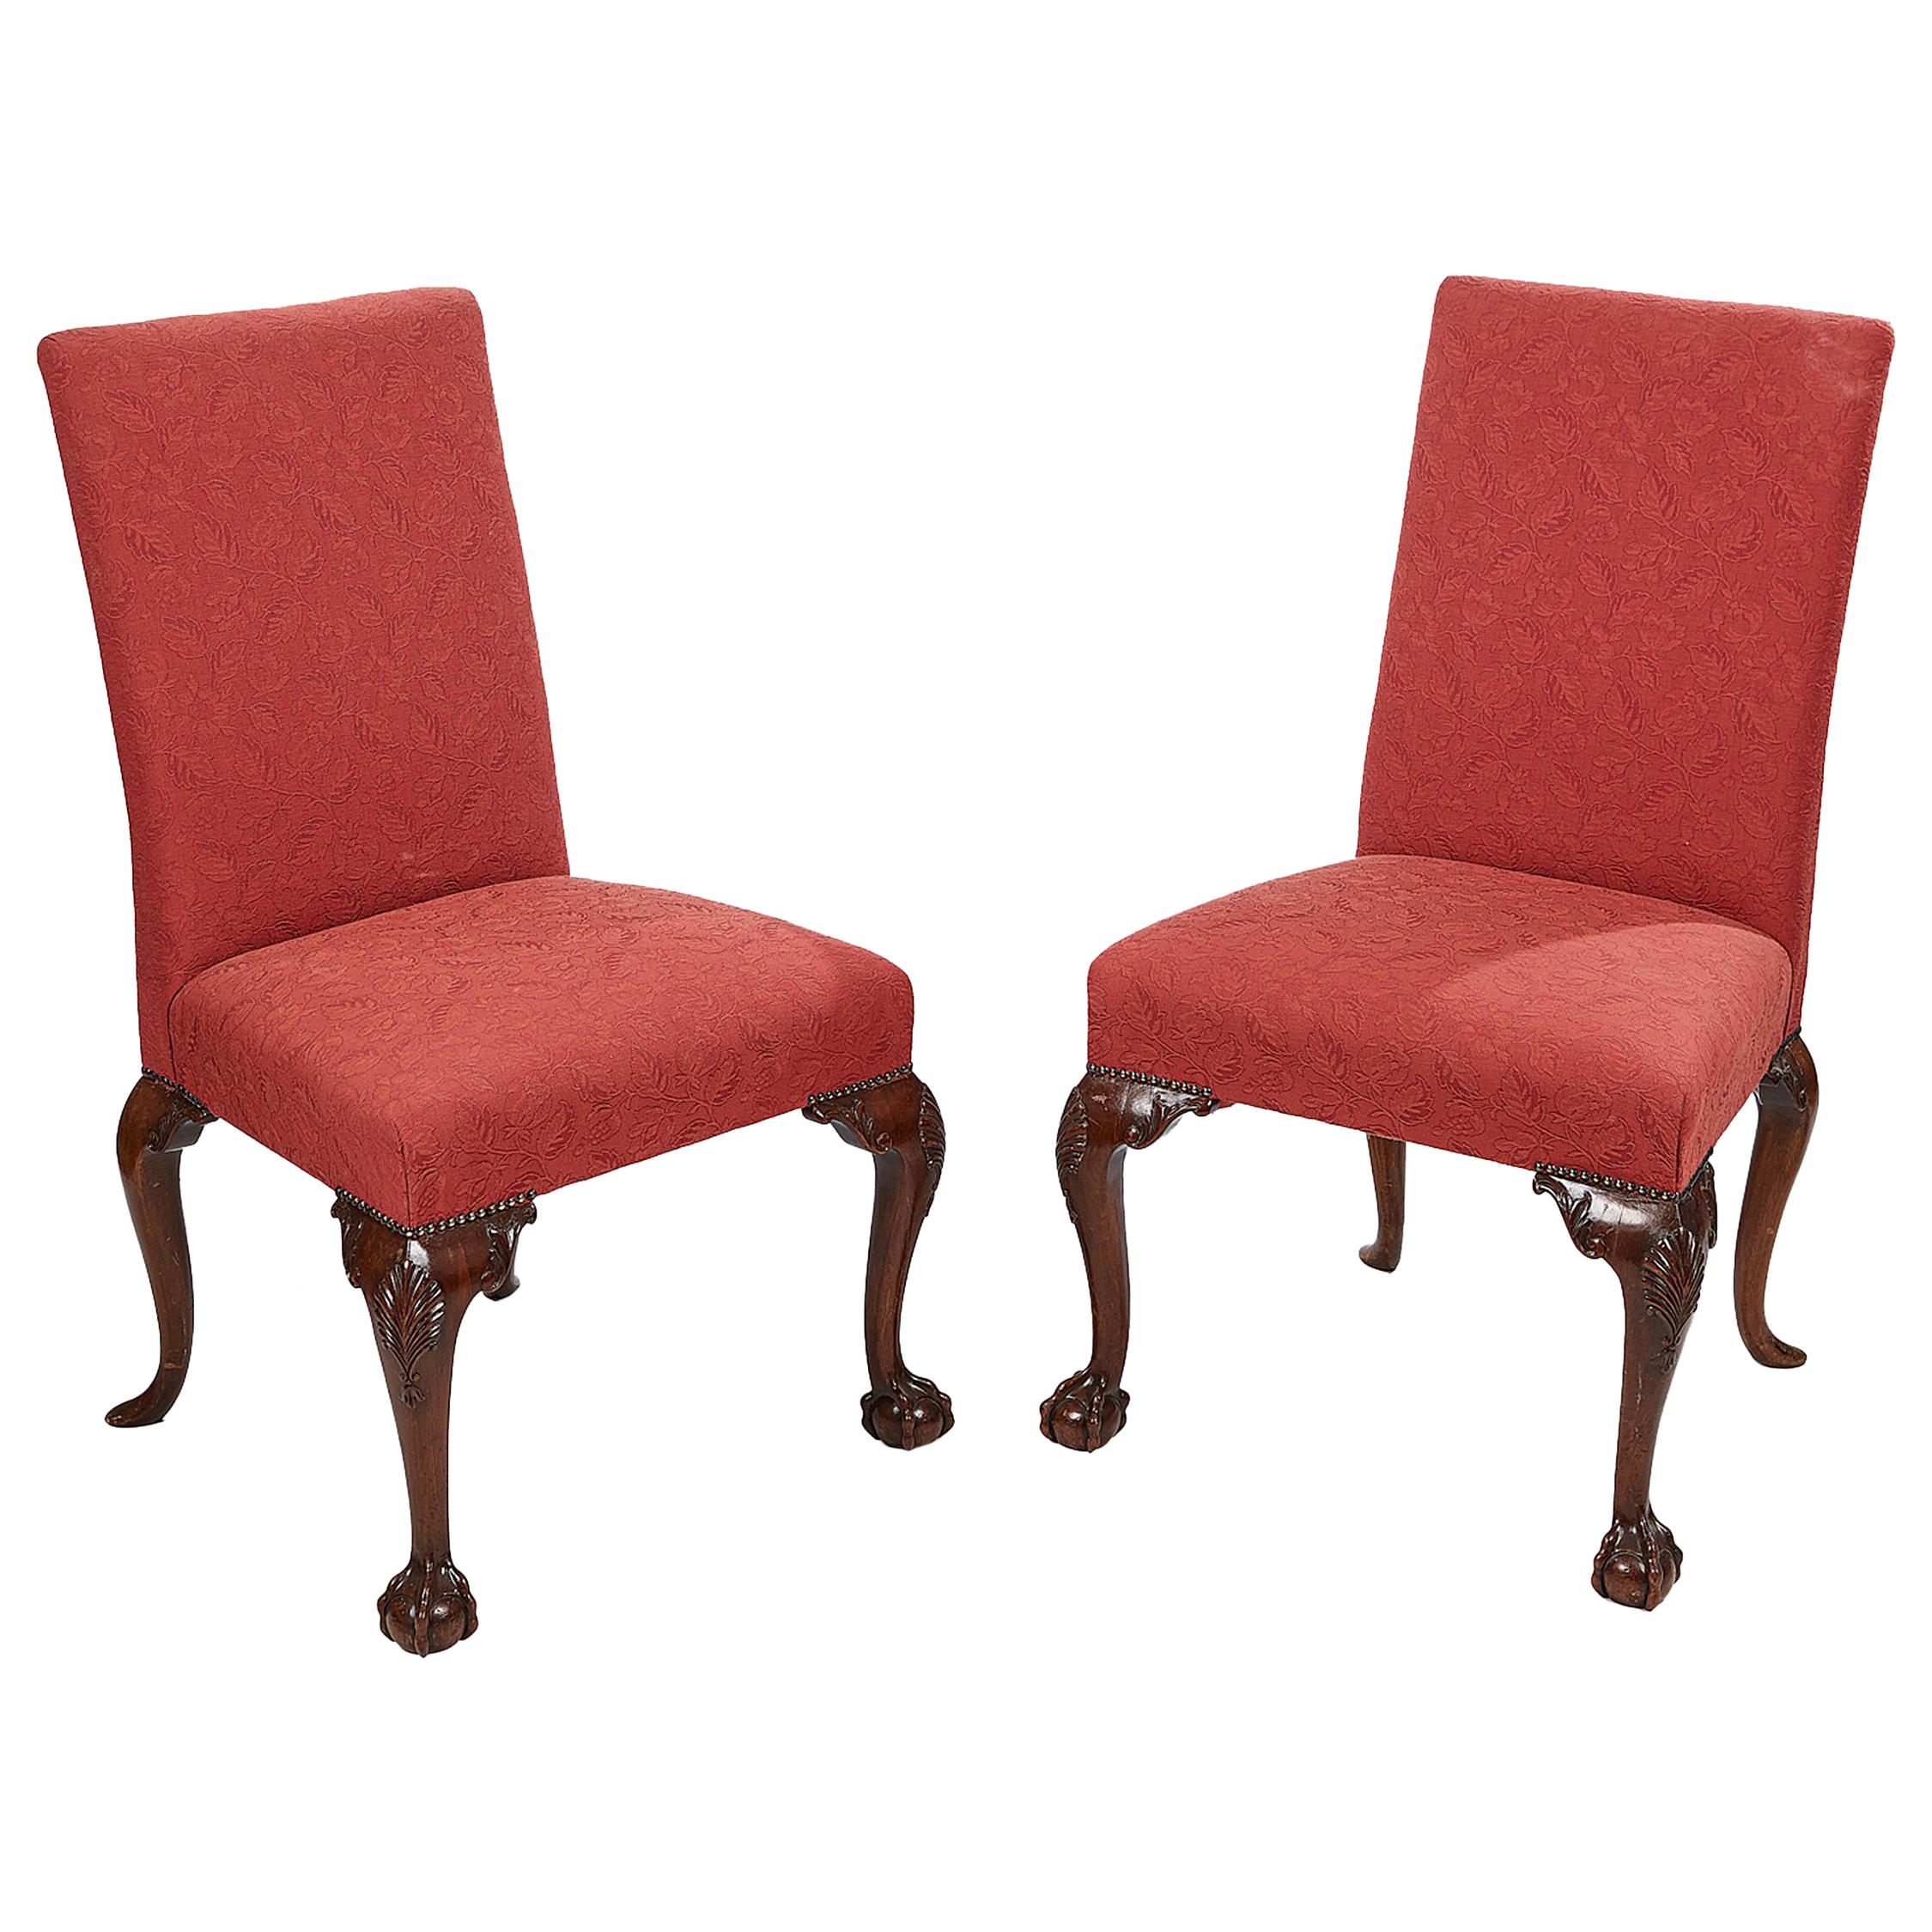 Pair of 19th Century Georgian Upholstered Side Chairs with Ball and Claw Feet